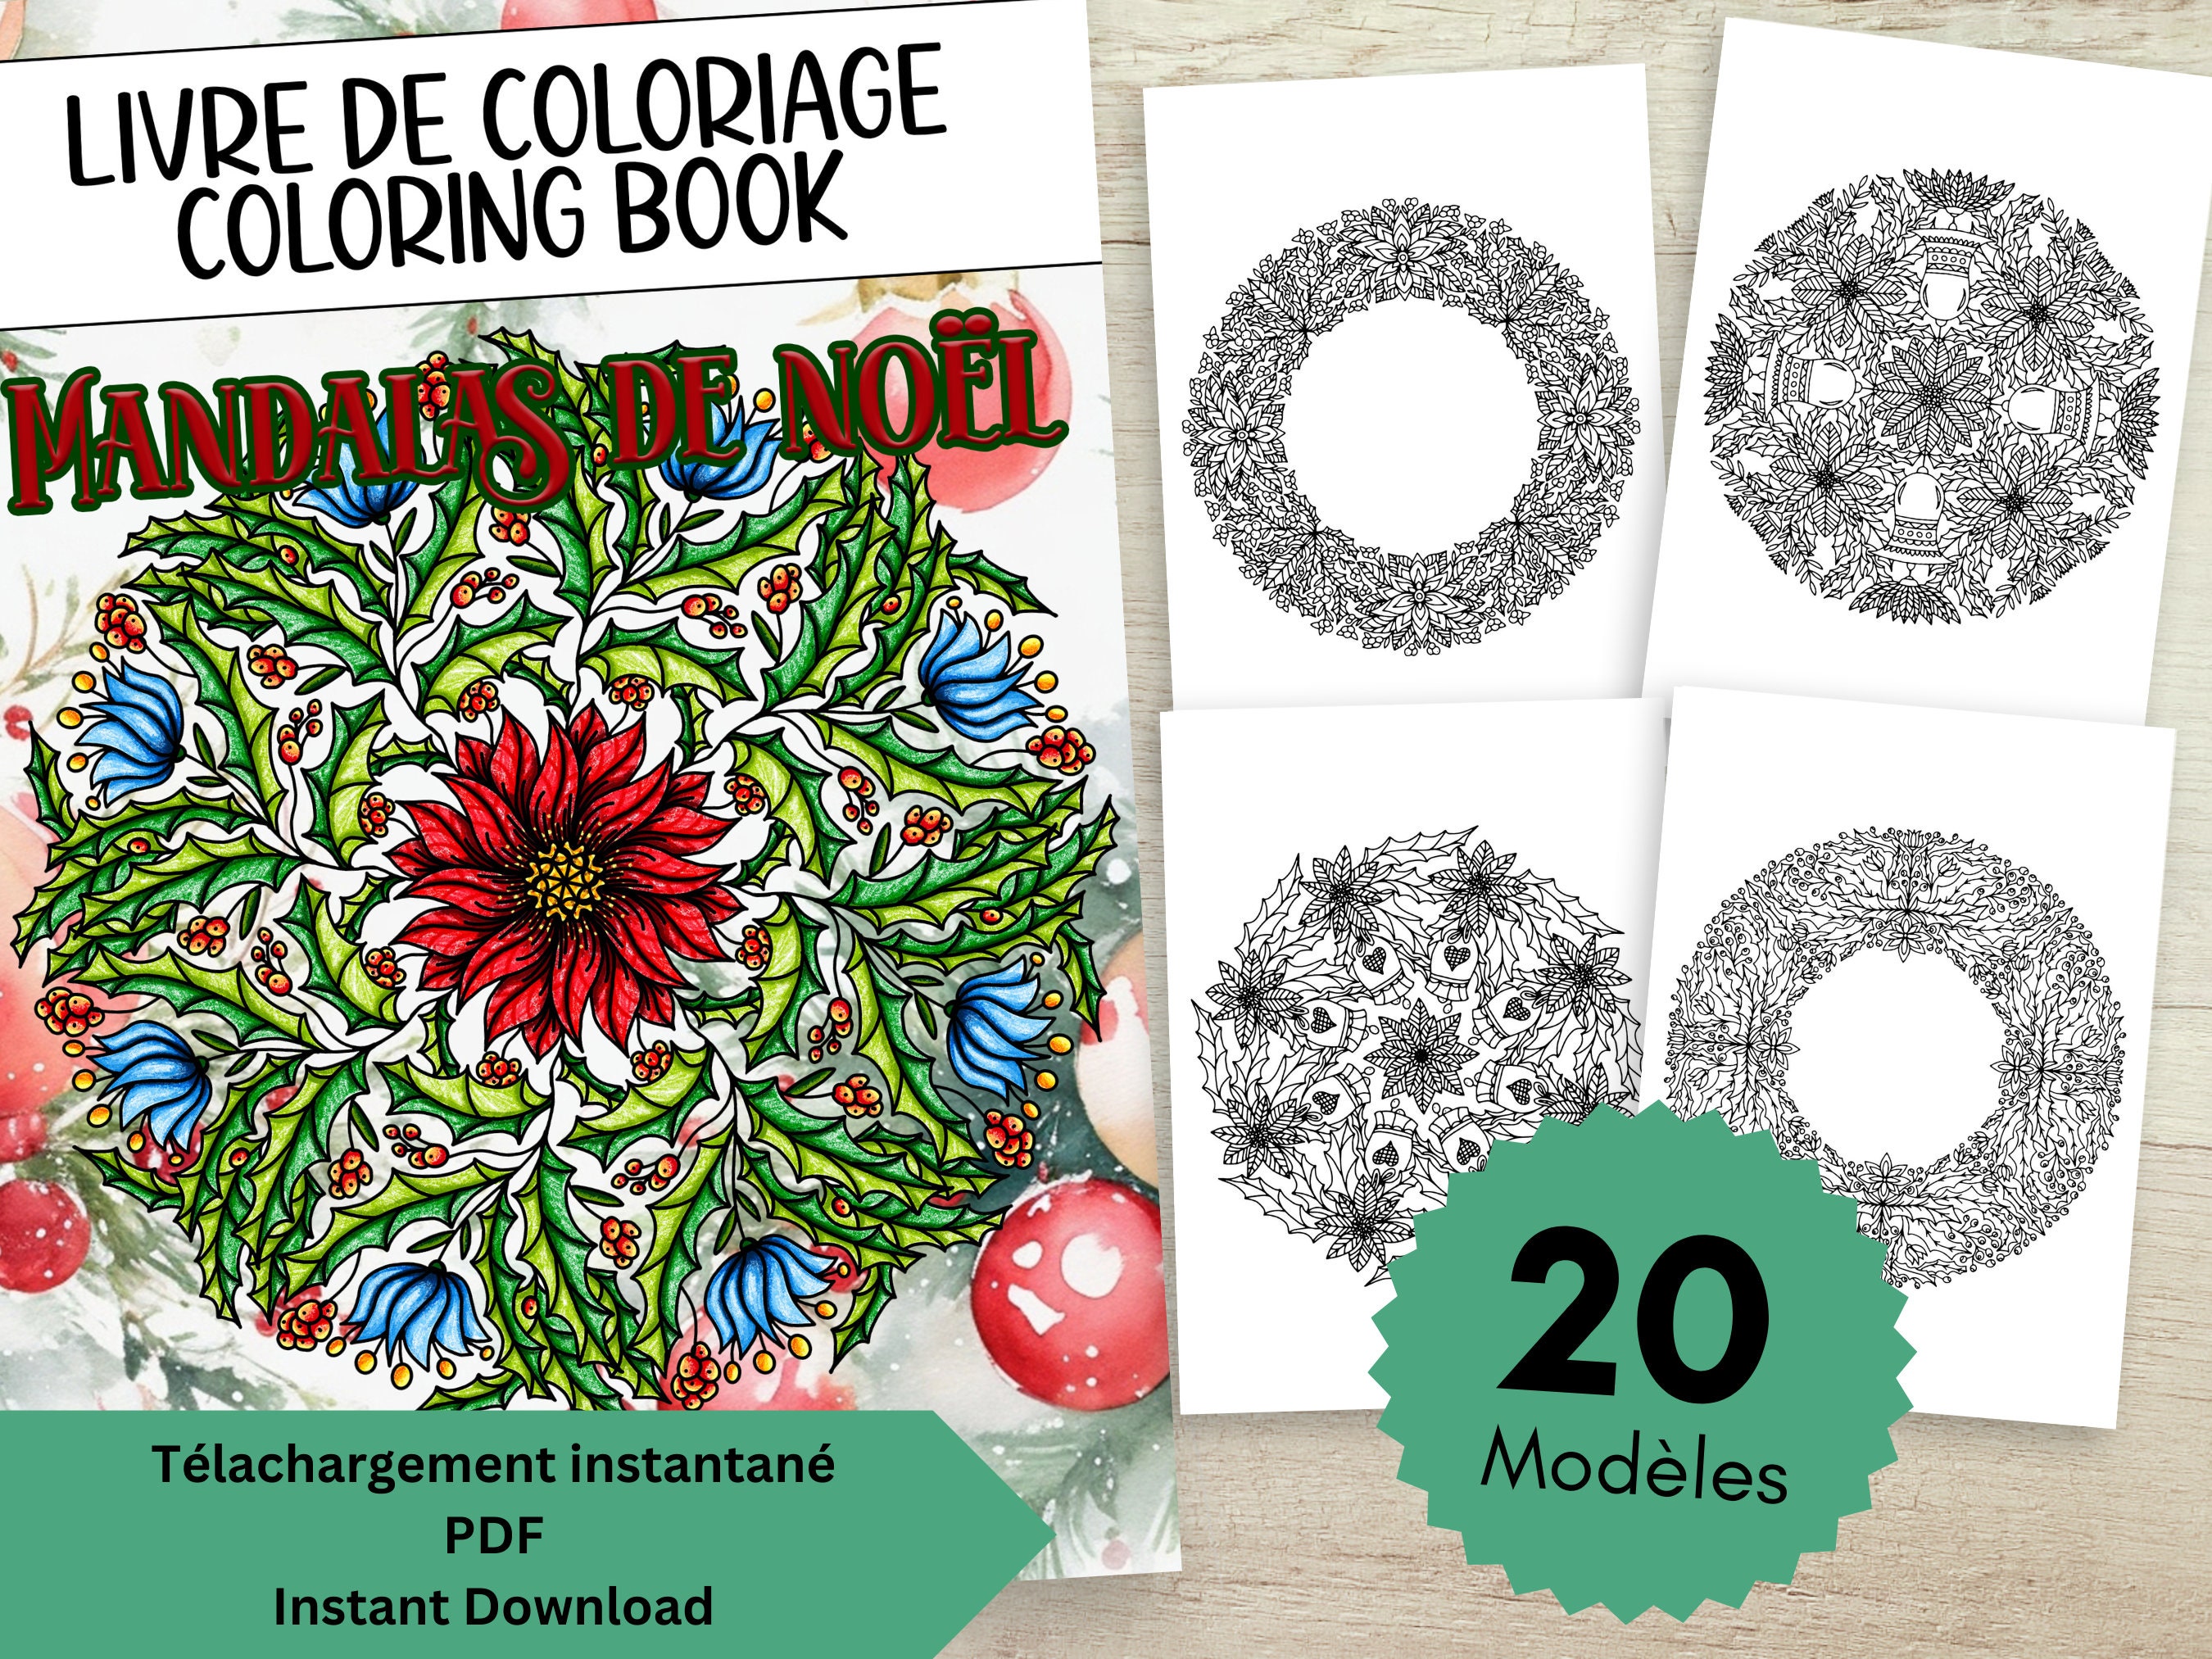 Printable Backwards Coloring Book Abstract Images Reverse Coloring